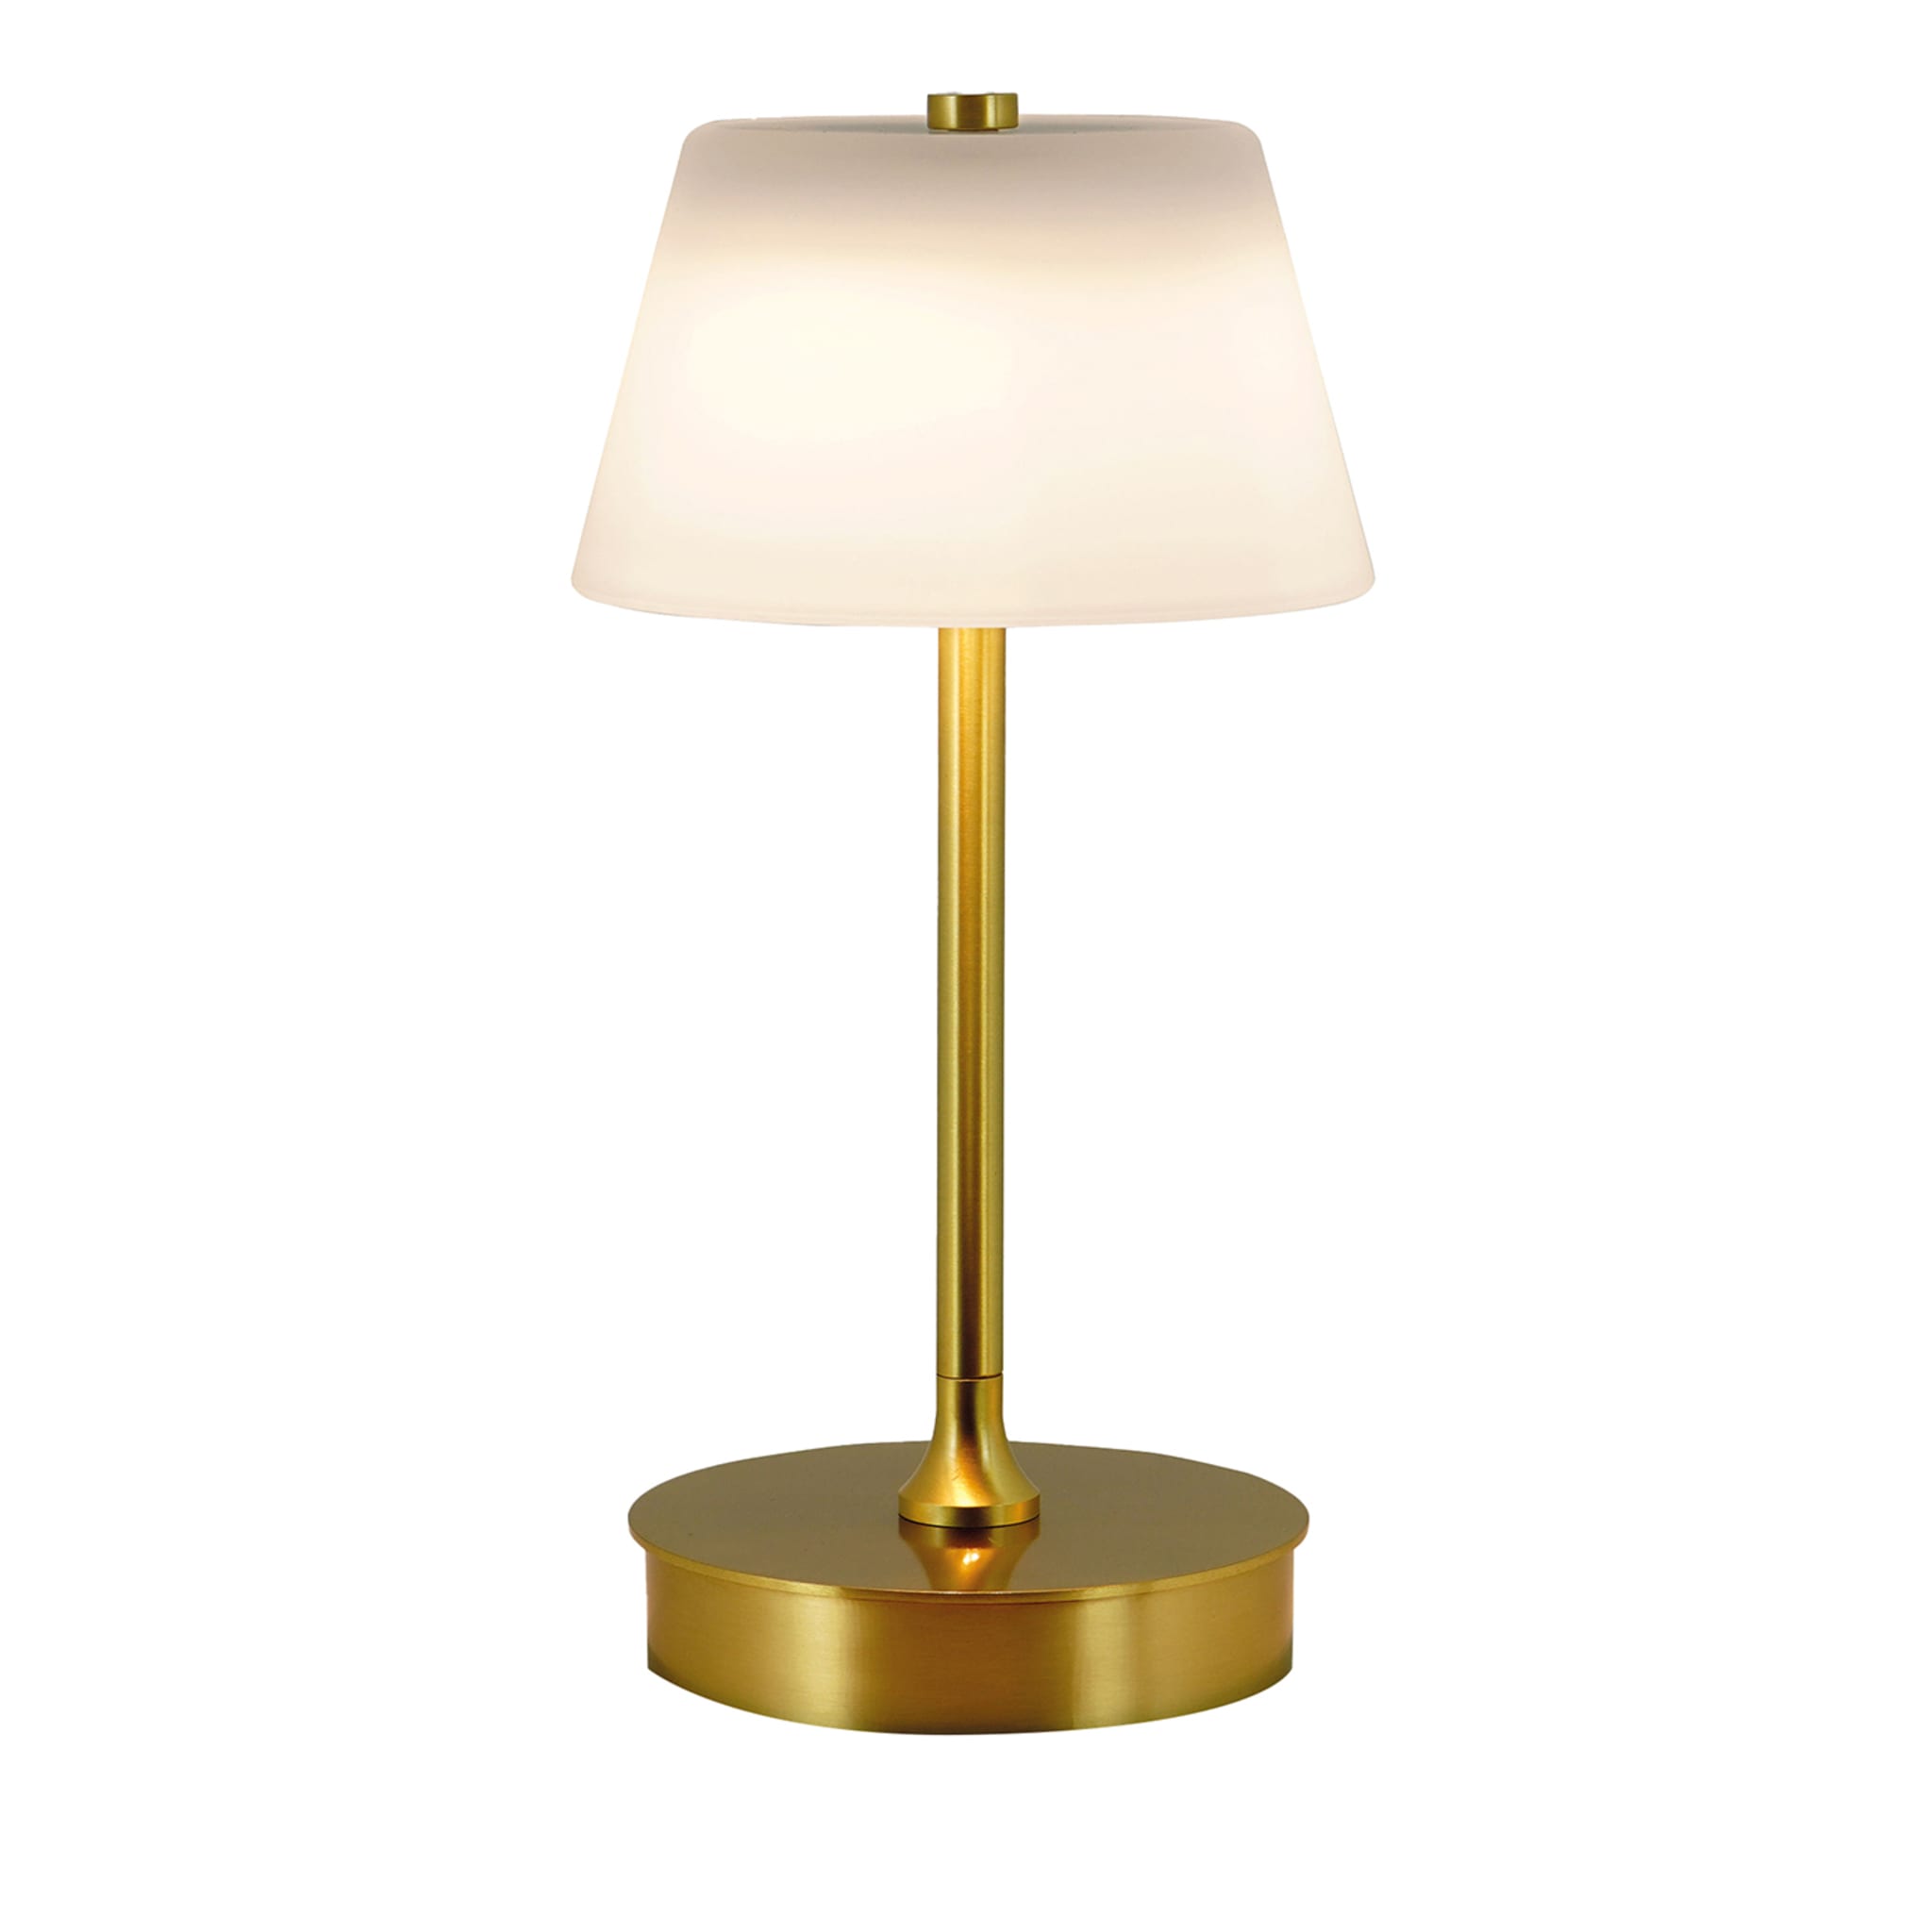 Lumetto Satin Brass Table Lamp by Stefano Tabarin - Main view